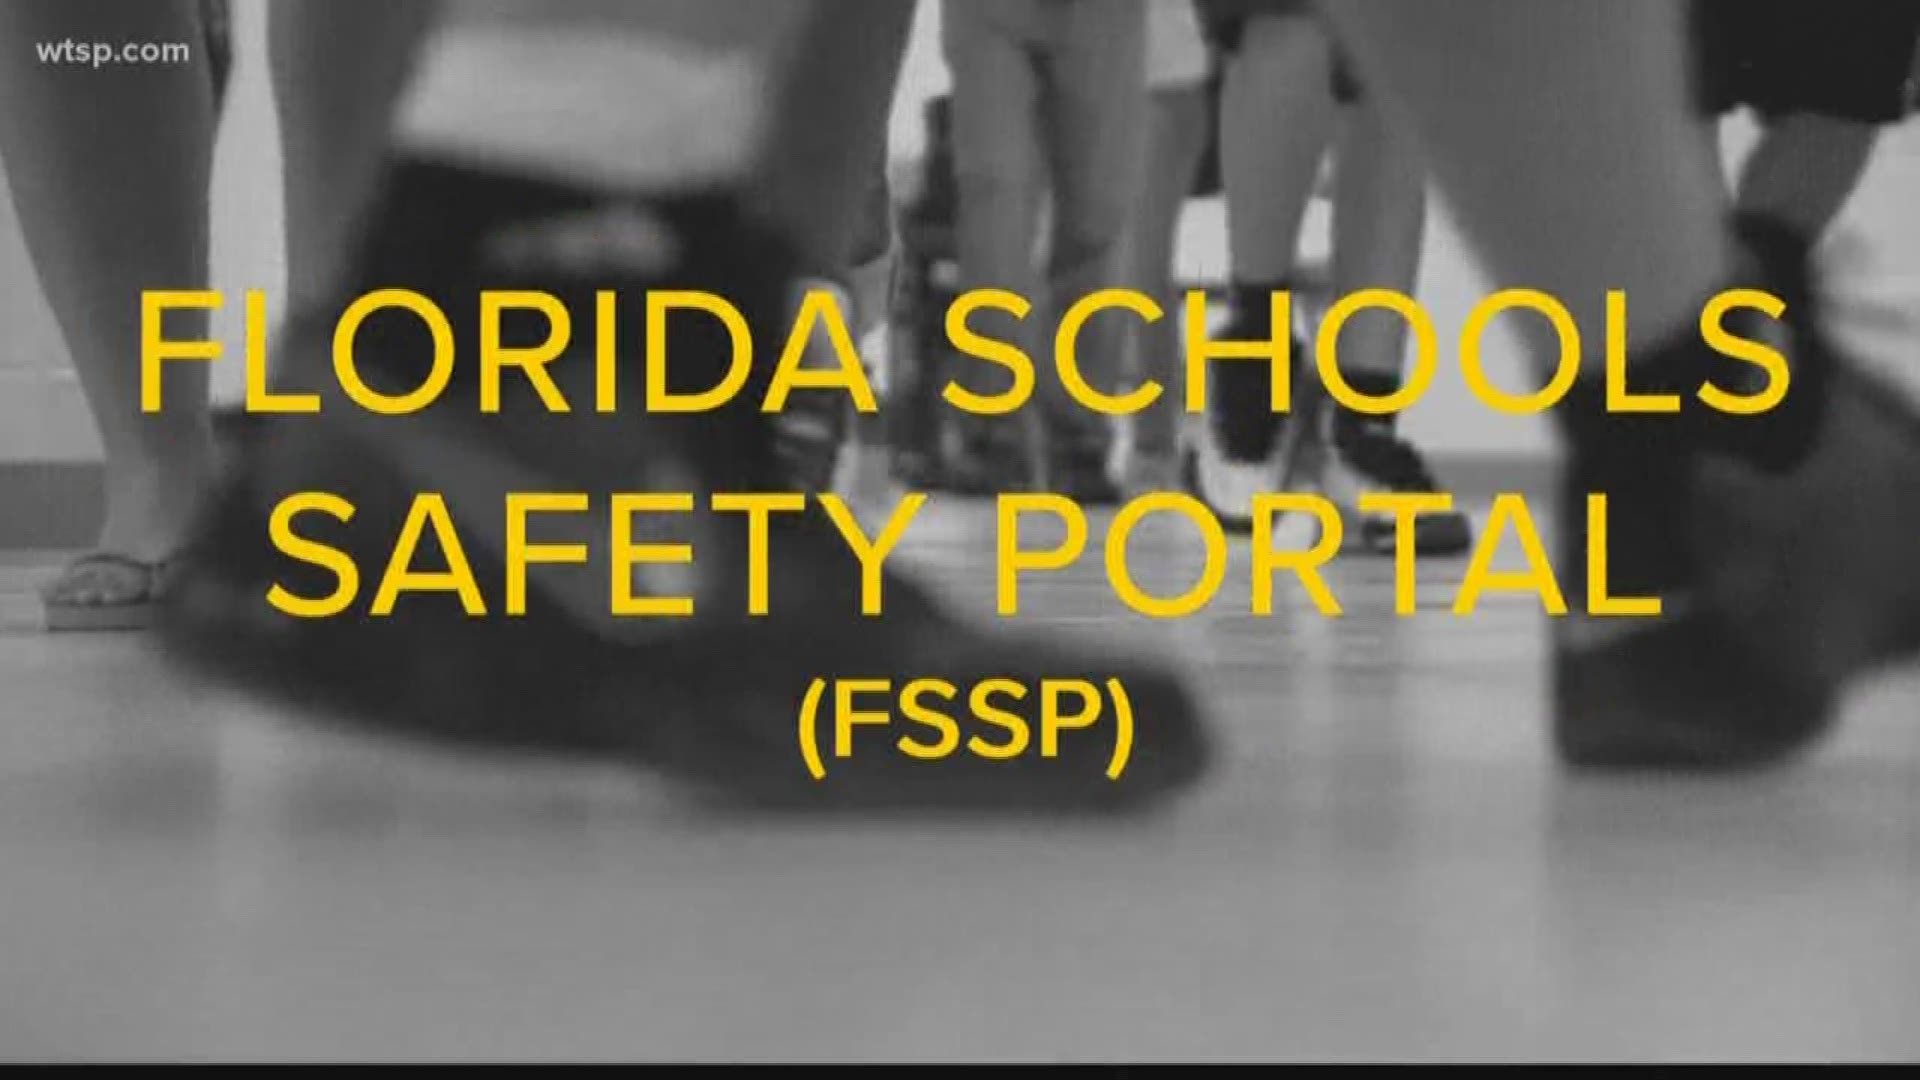 A school portal will aggregate information from a variety of sources, including social media and local law enforcement records. https://on.wtsp.com/2Z41gbQ